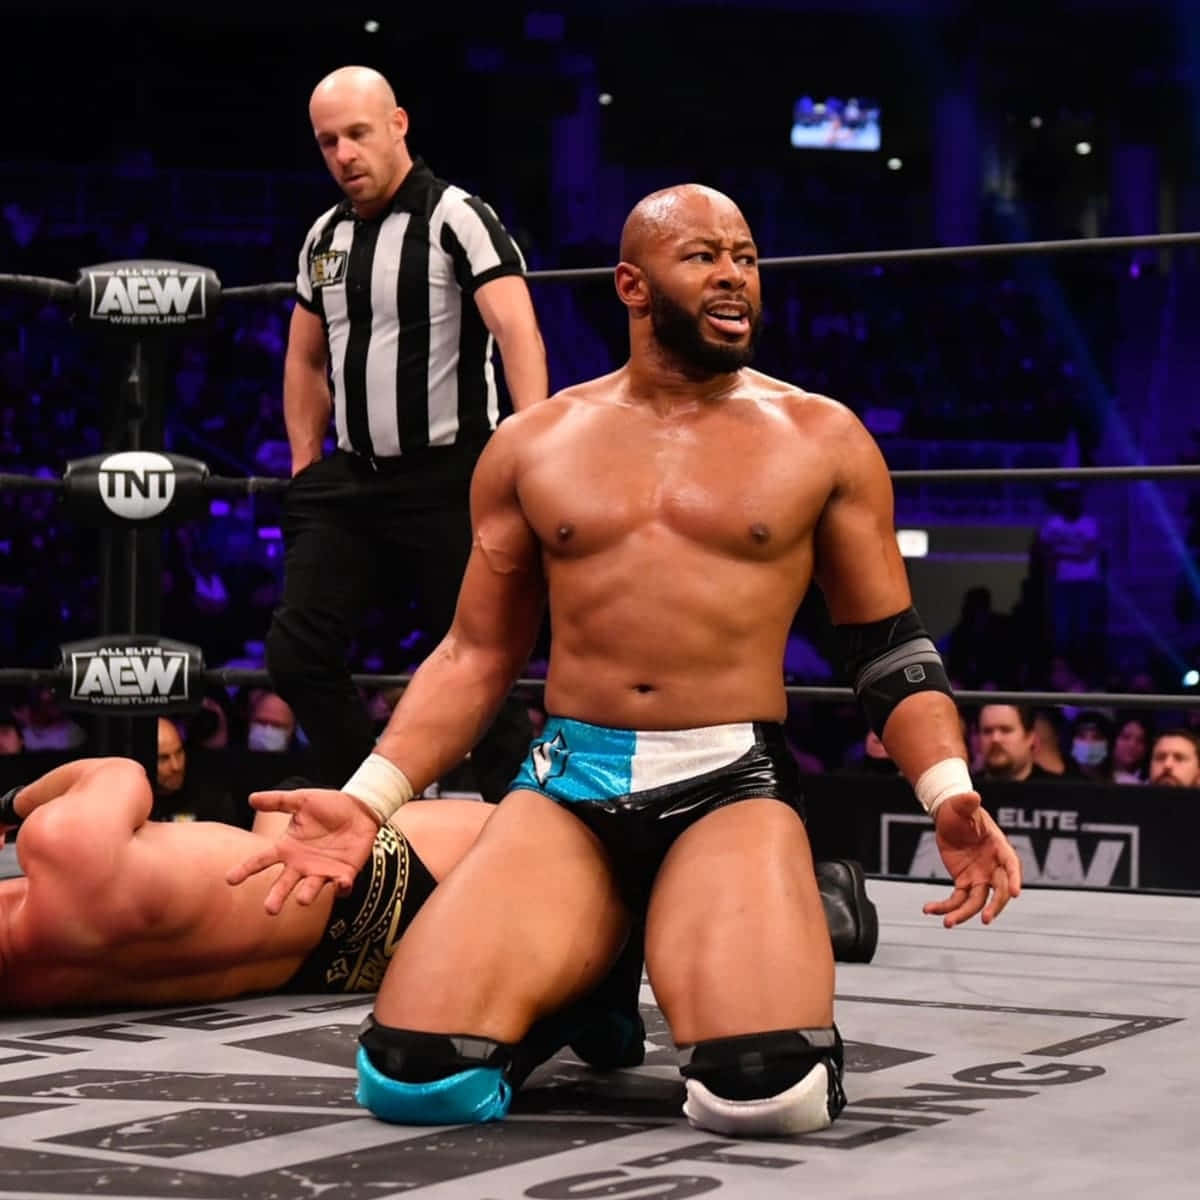 Wrestler Jay Lethal Inside Aew Ring Picture